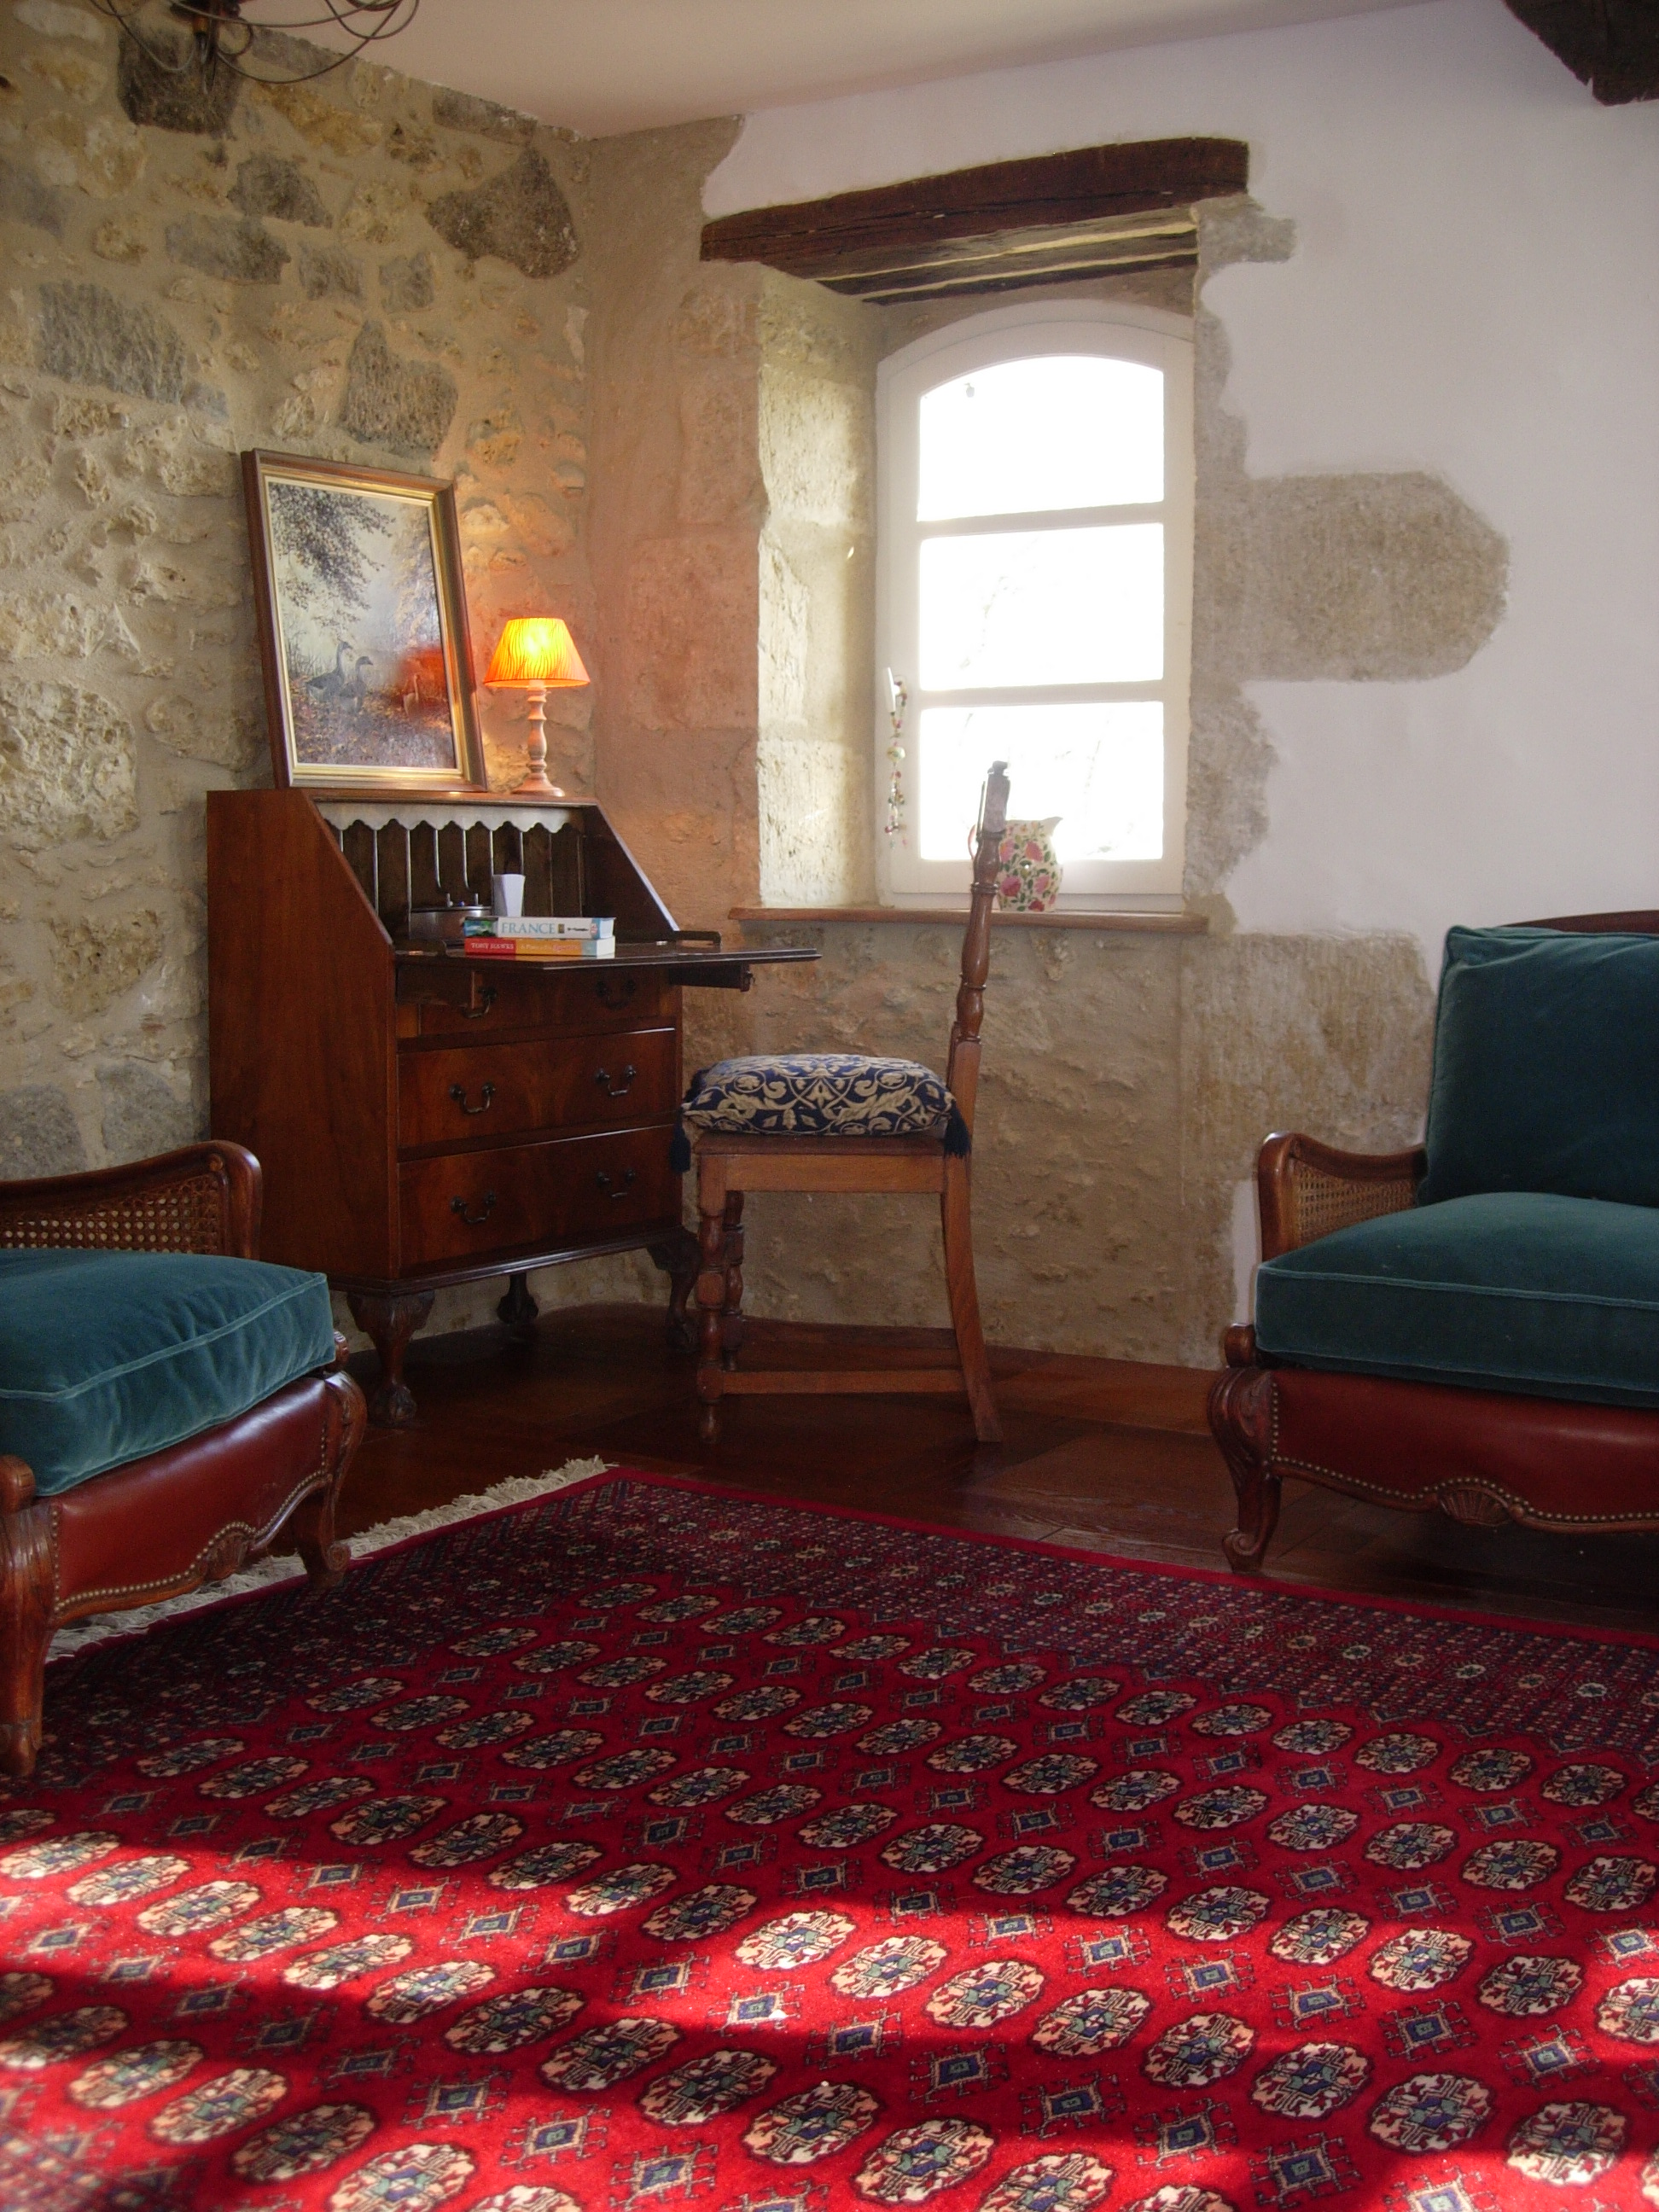 Salon at Barrusclet French farmhouse